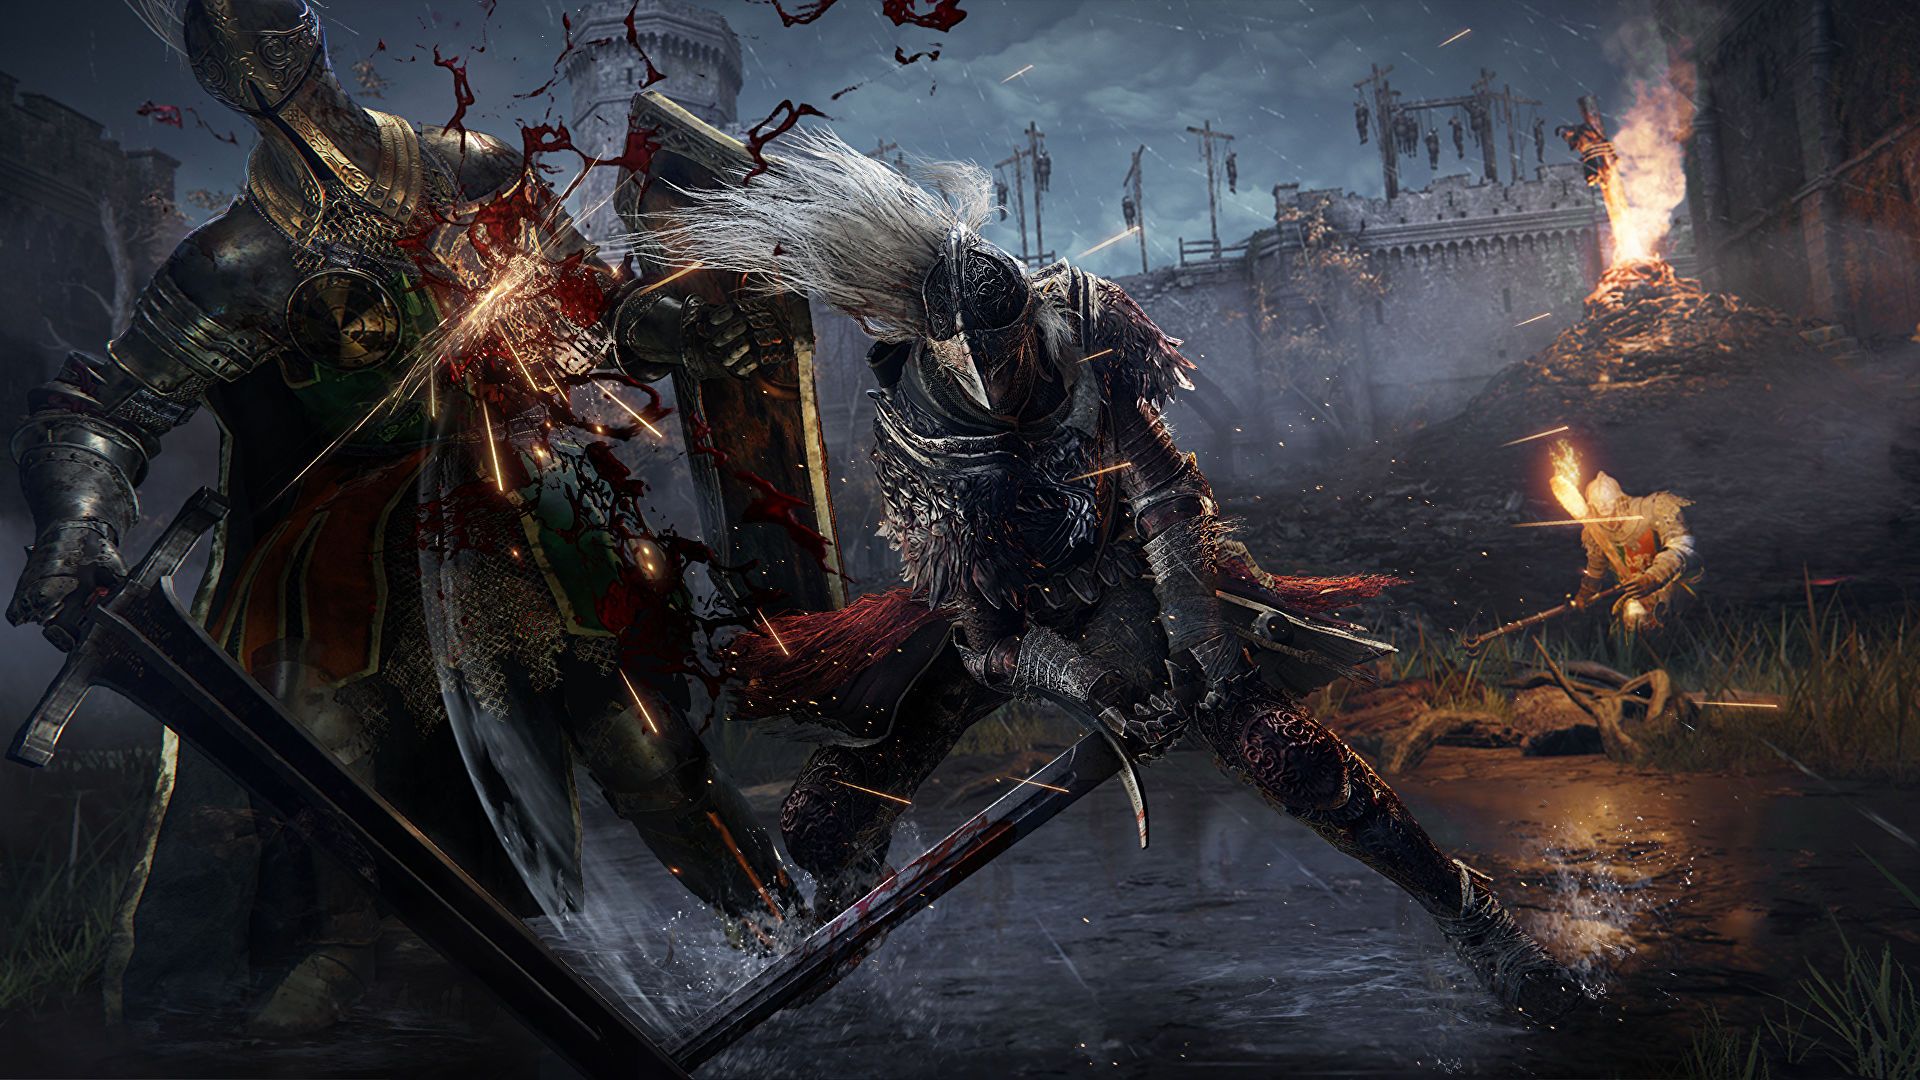 Screenshot of Elden Ring's main character attacking a knight enemy